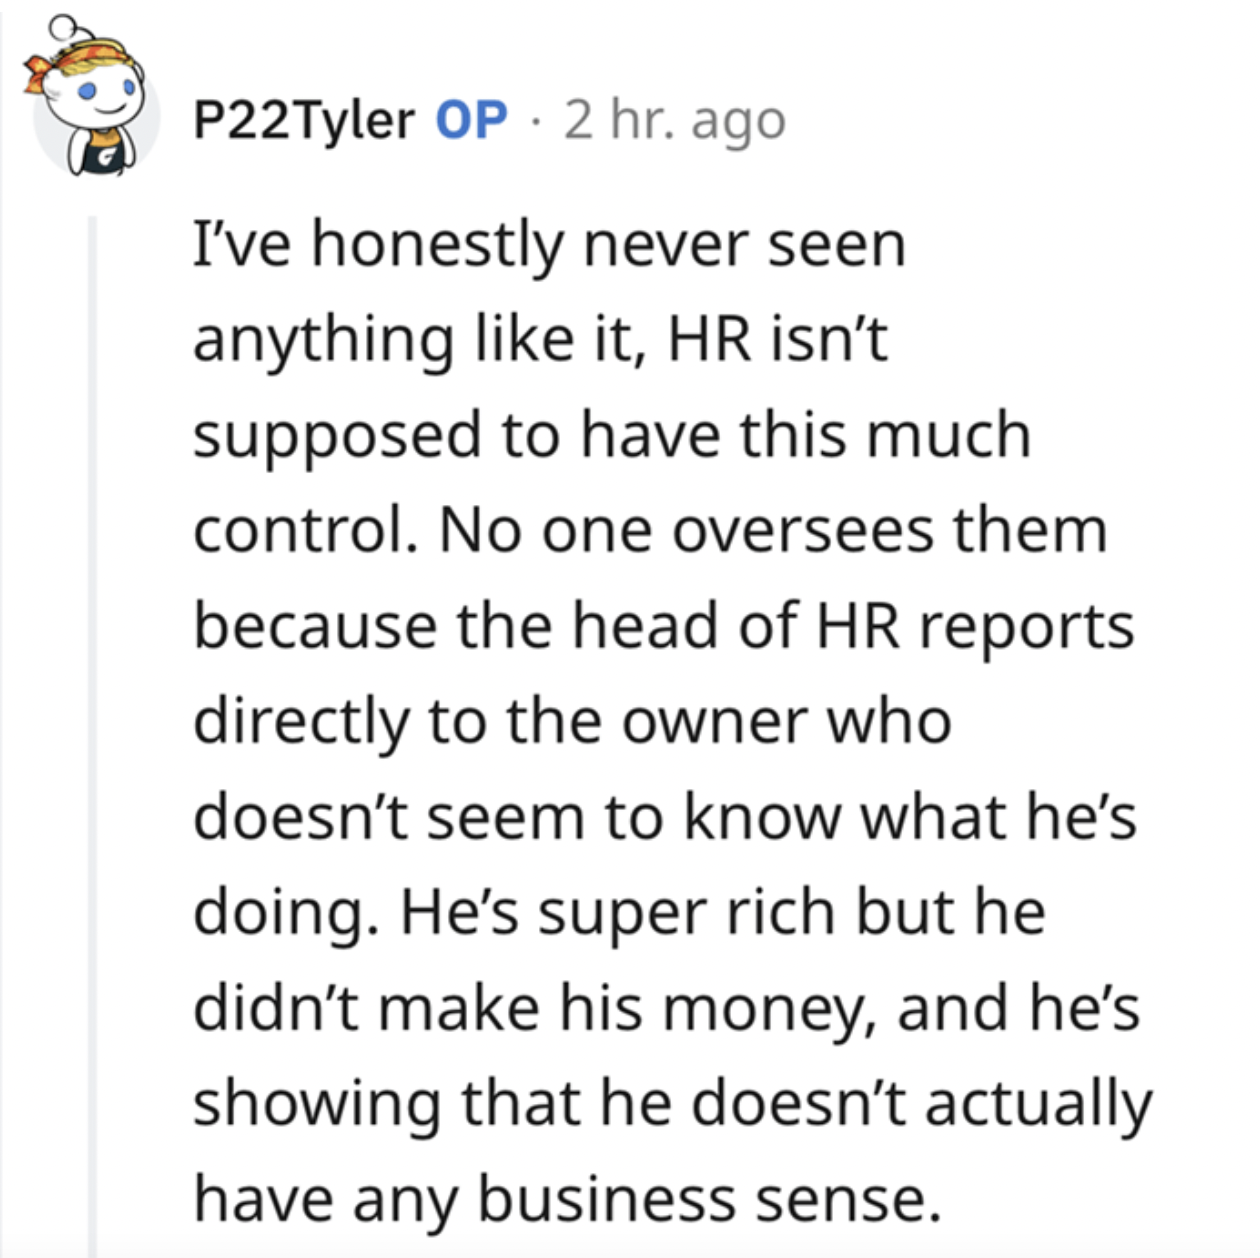 paper - P22Tyler Op 2 hr. ago I've honestly never seen anything it, Hr isn't supposed to have this much control. No one oversees them because the head of Hr reports directly to the owner who doesn't seem to know what he's doing. He's super rich but he did